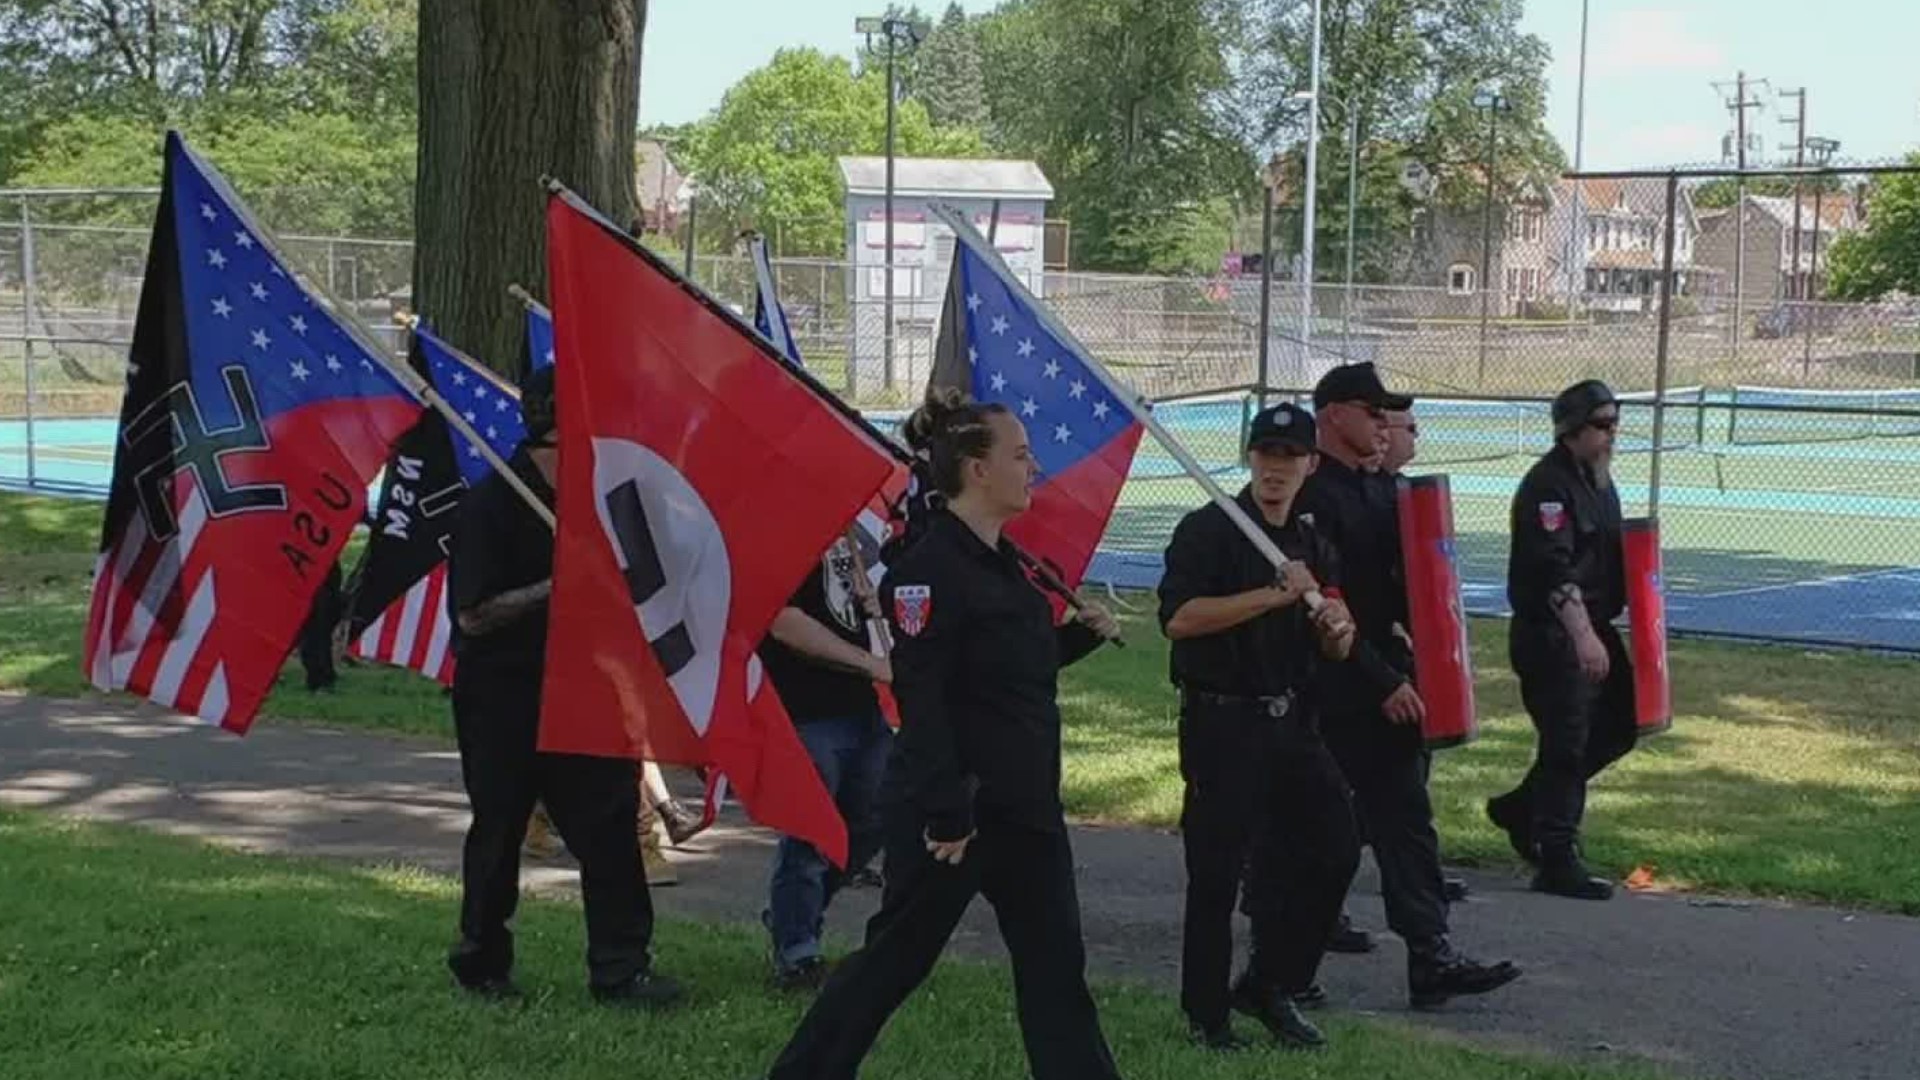 A group of Neo-Nazis was found illegally protesting at a park downtown Saturday. Local police shut down the march due to a lack of permits.